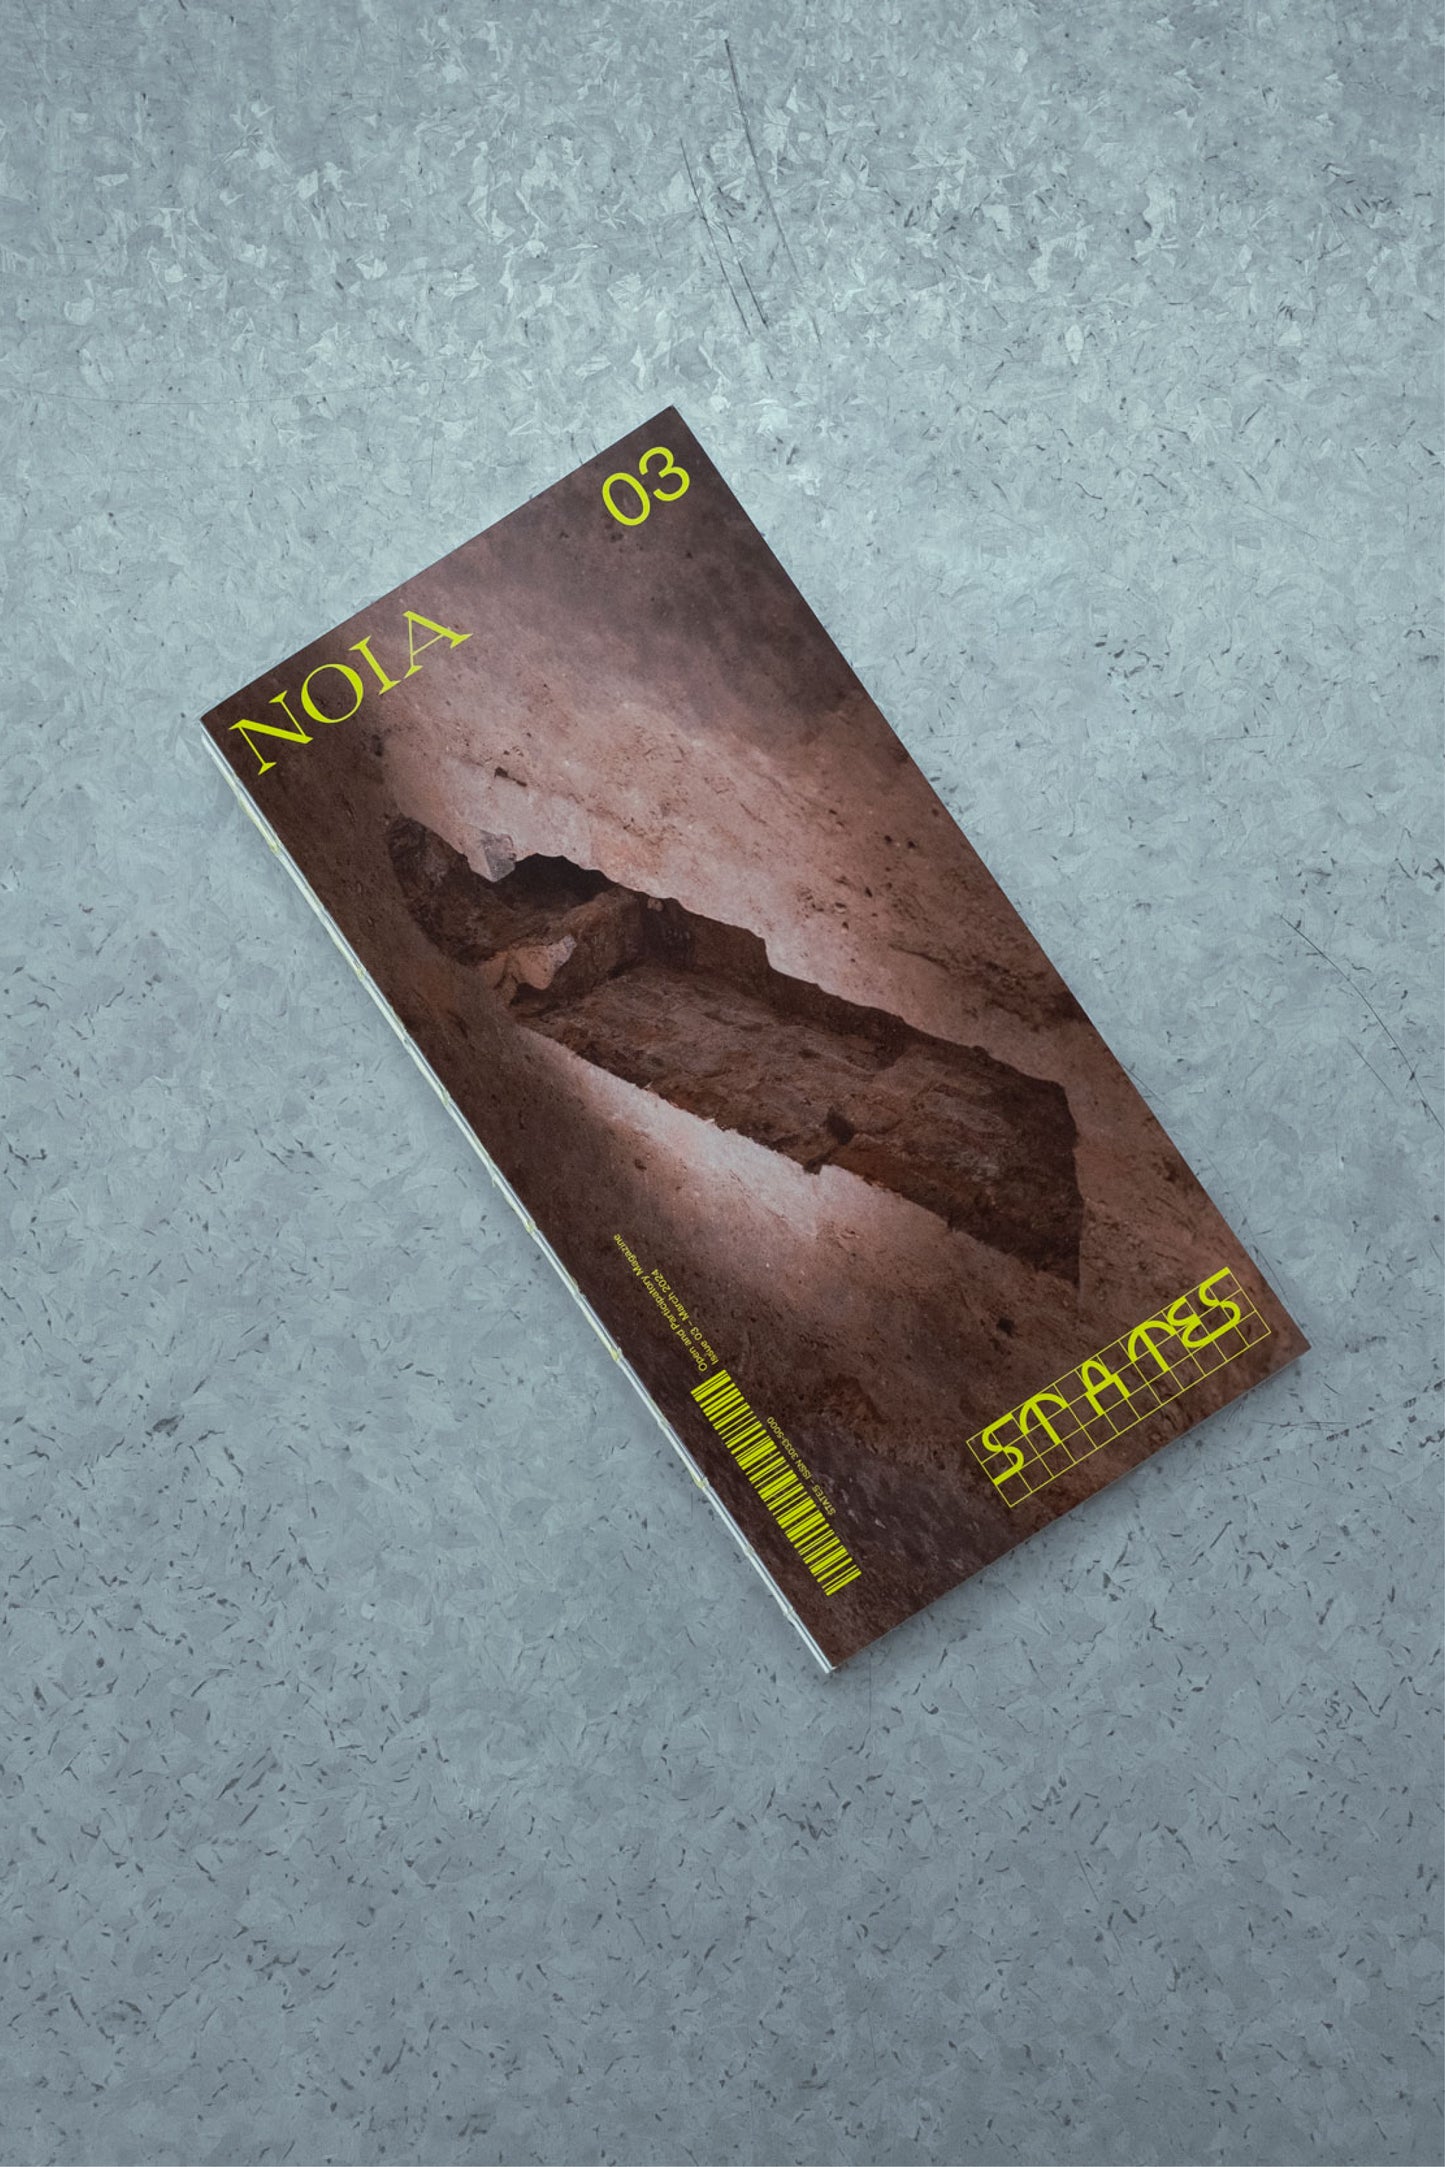 NOIA Issue 3: States